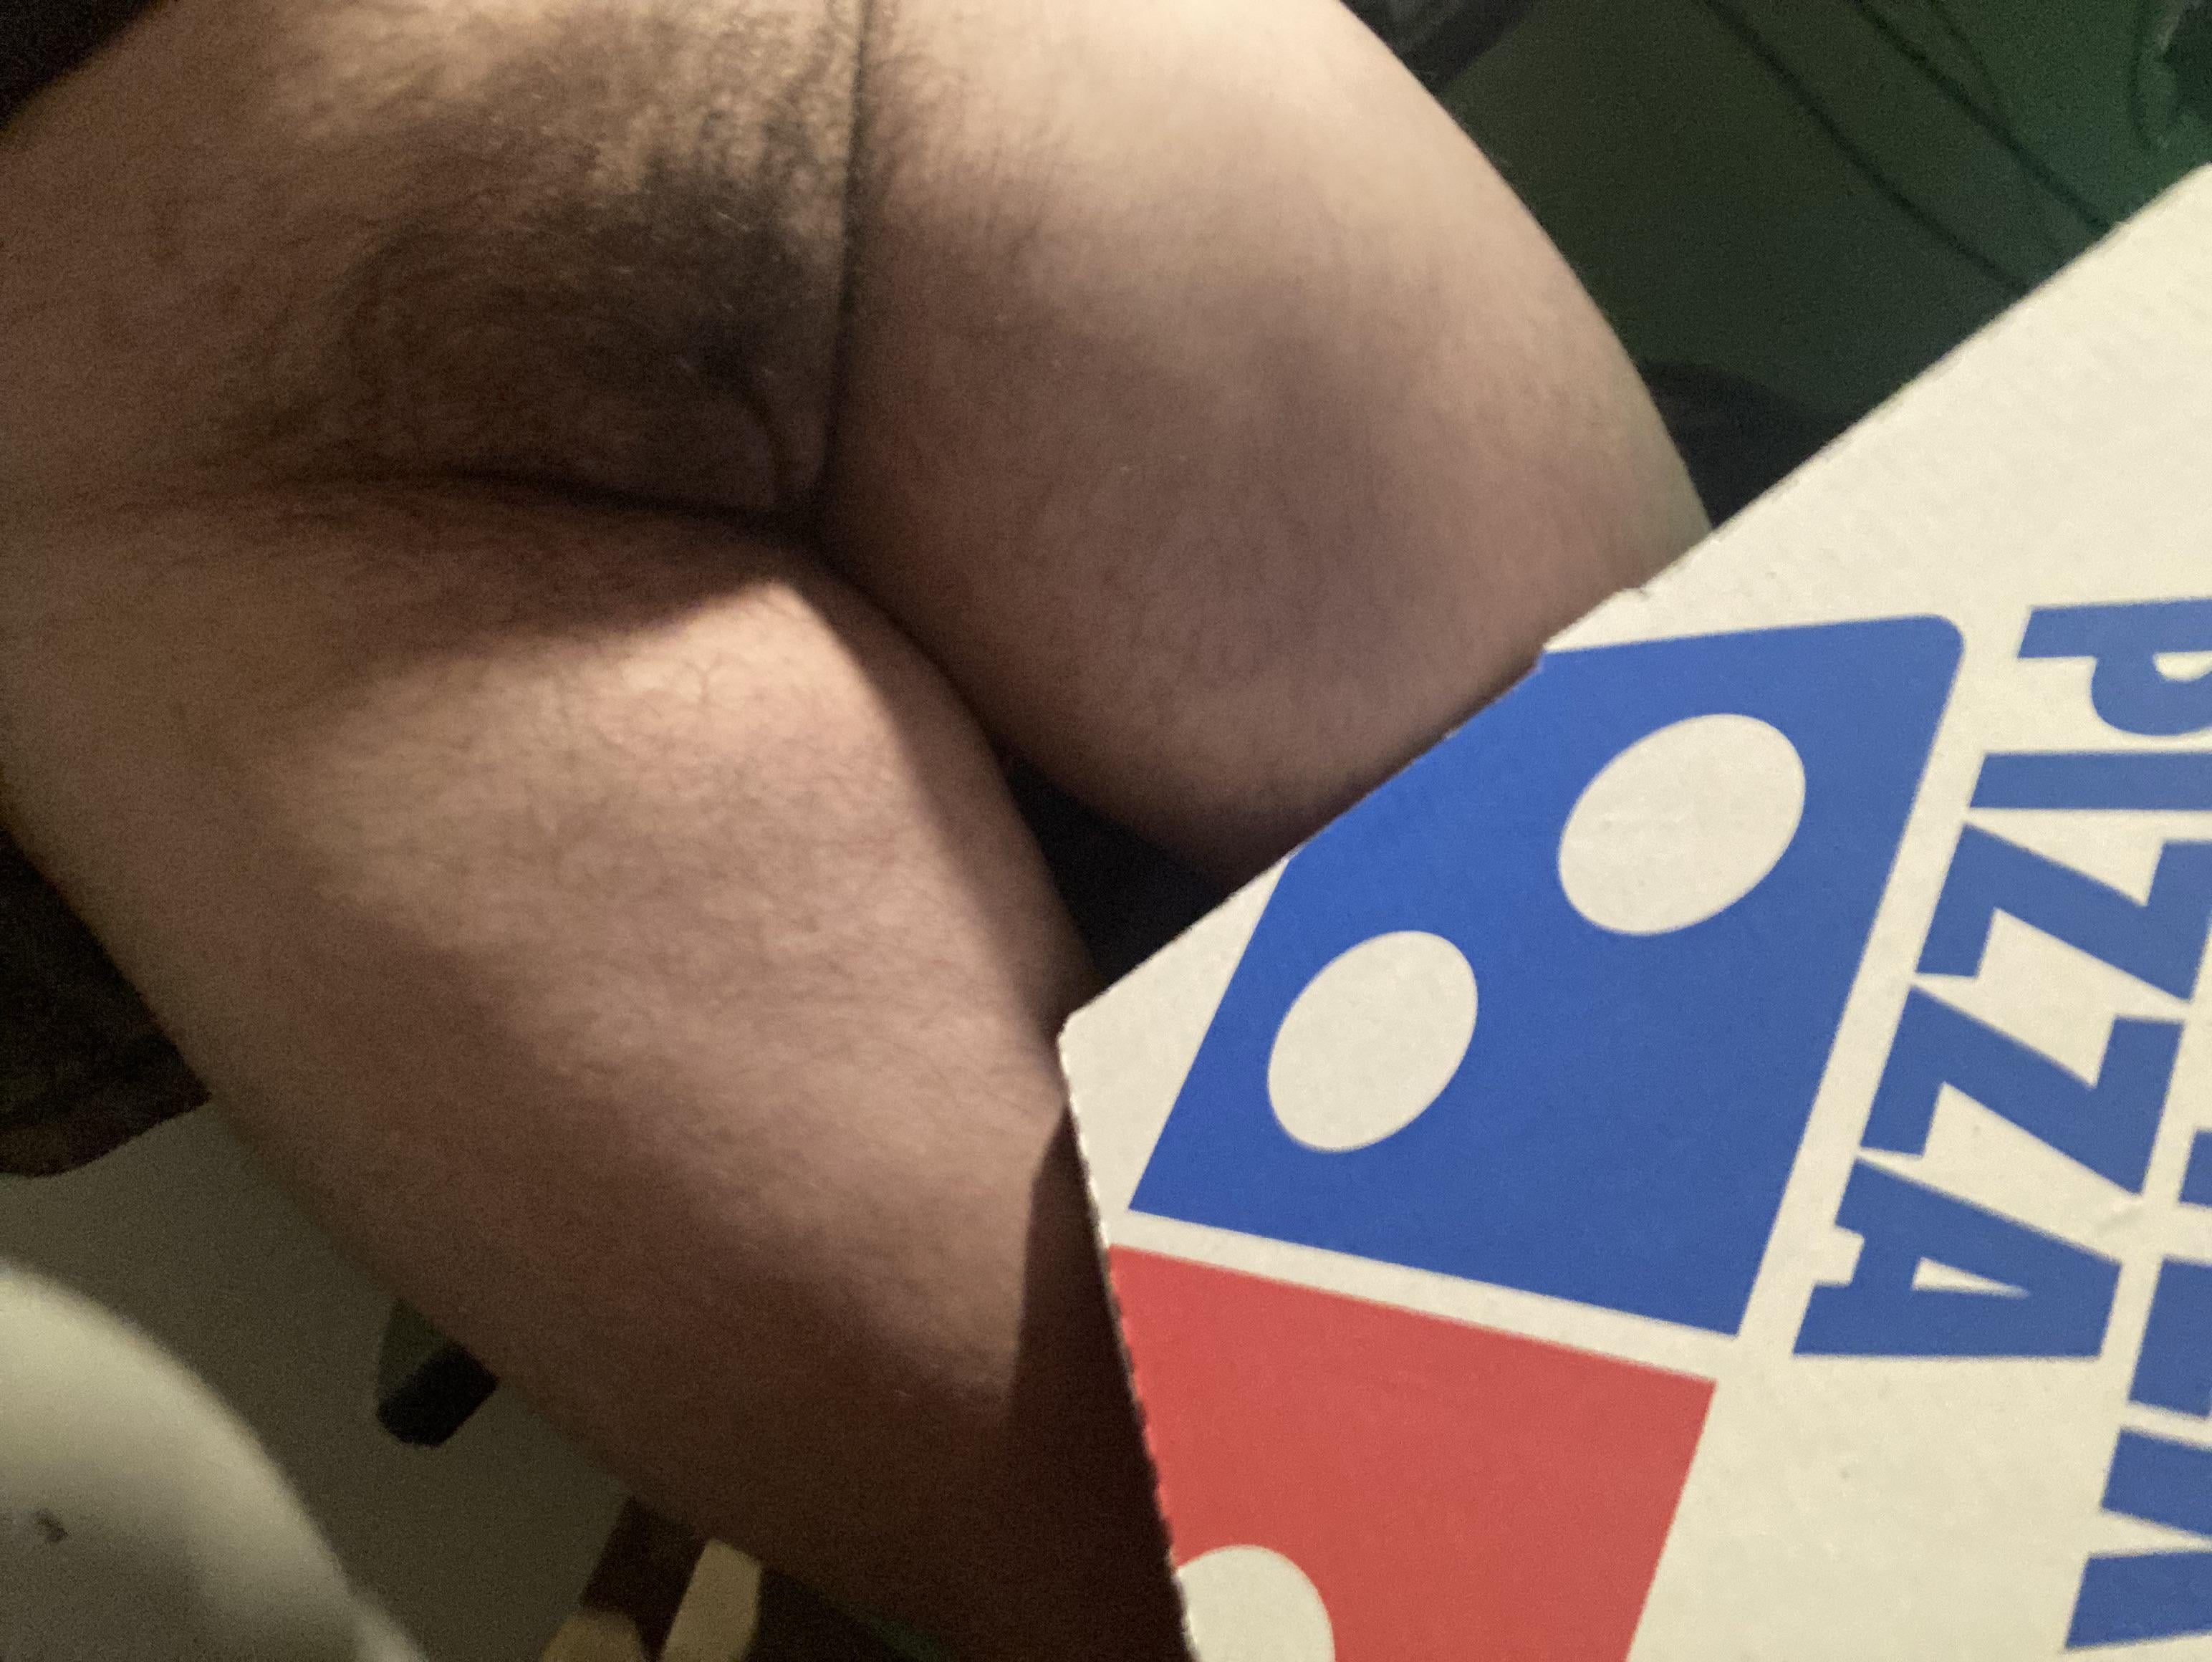 Pussy and pizza I may be biased but my pussy